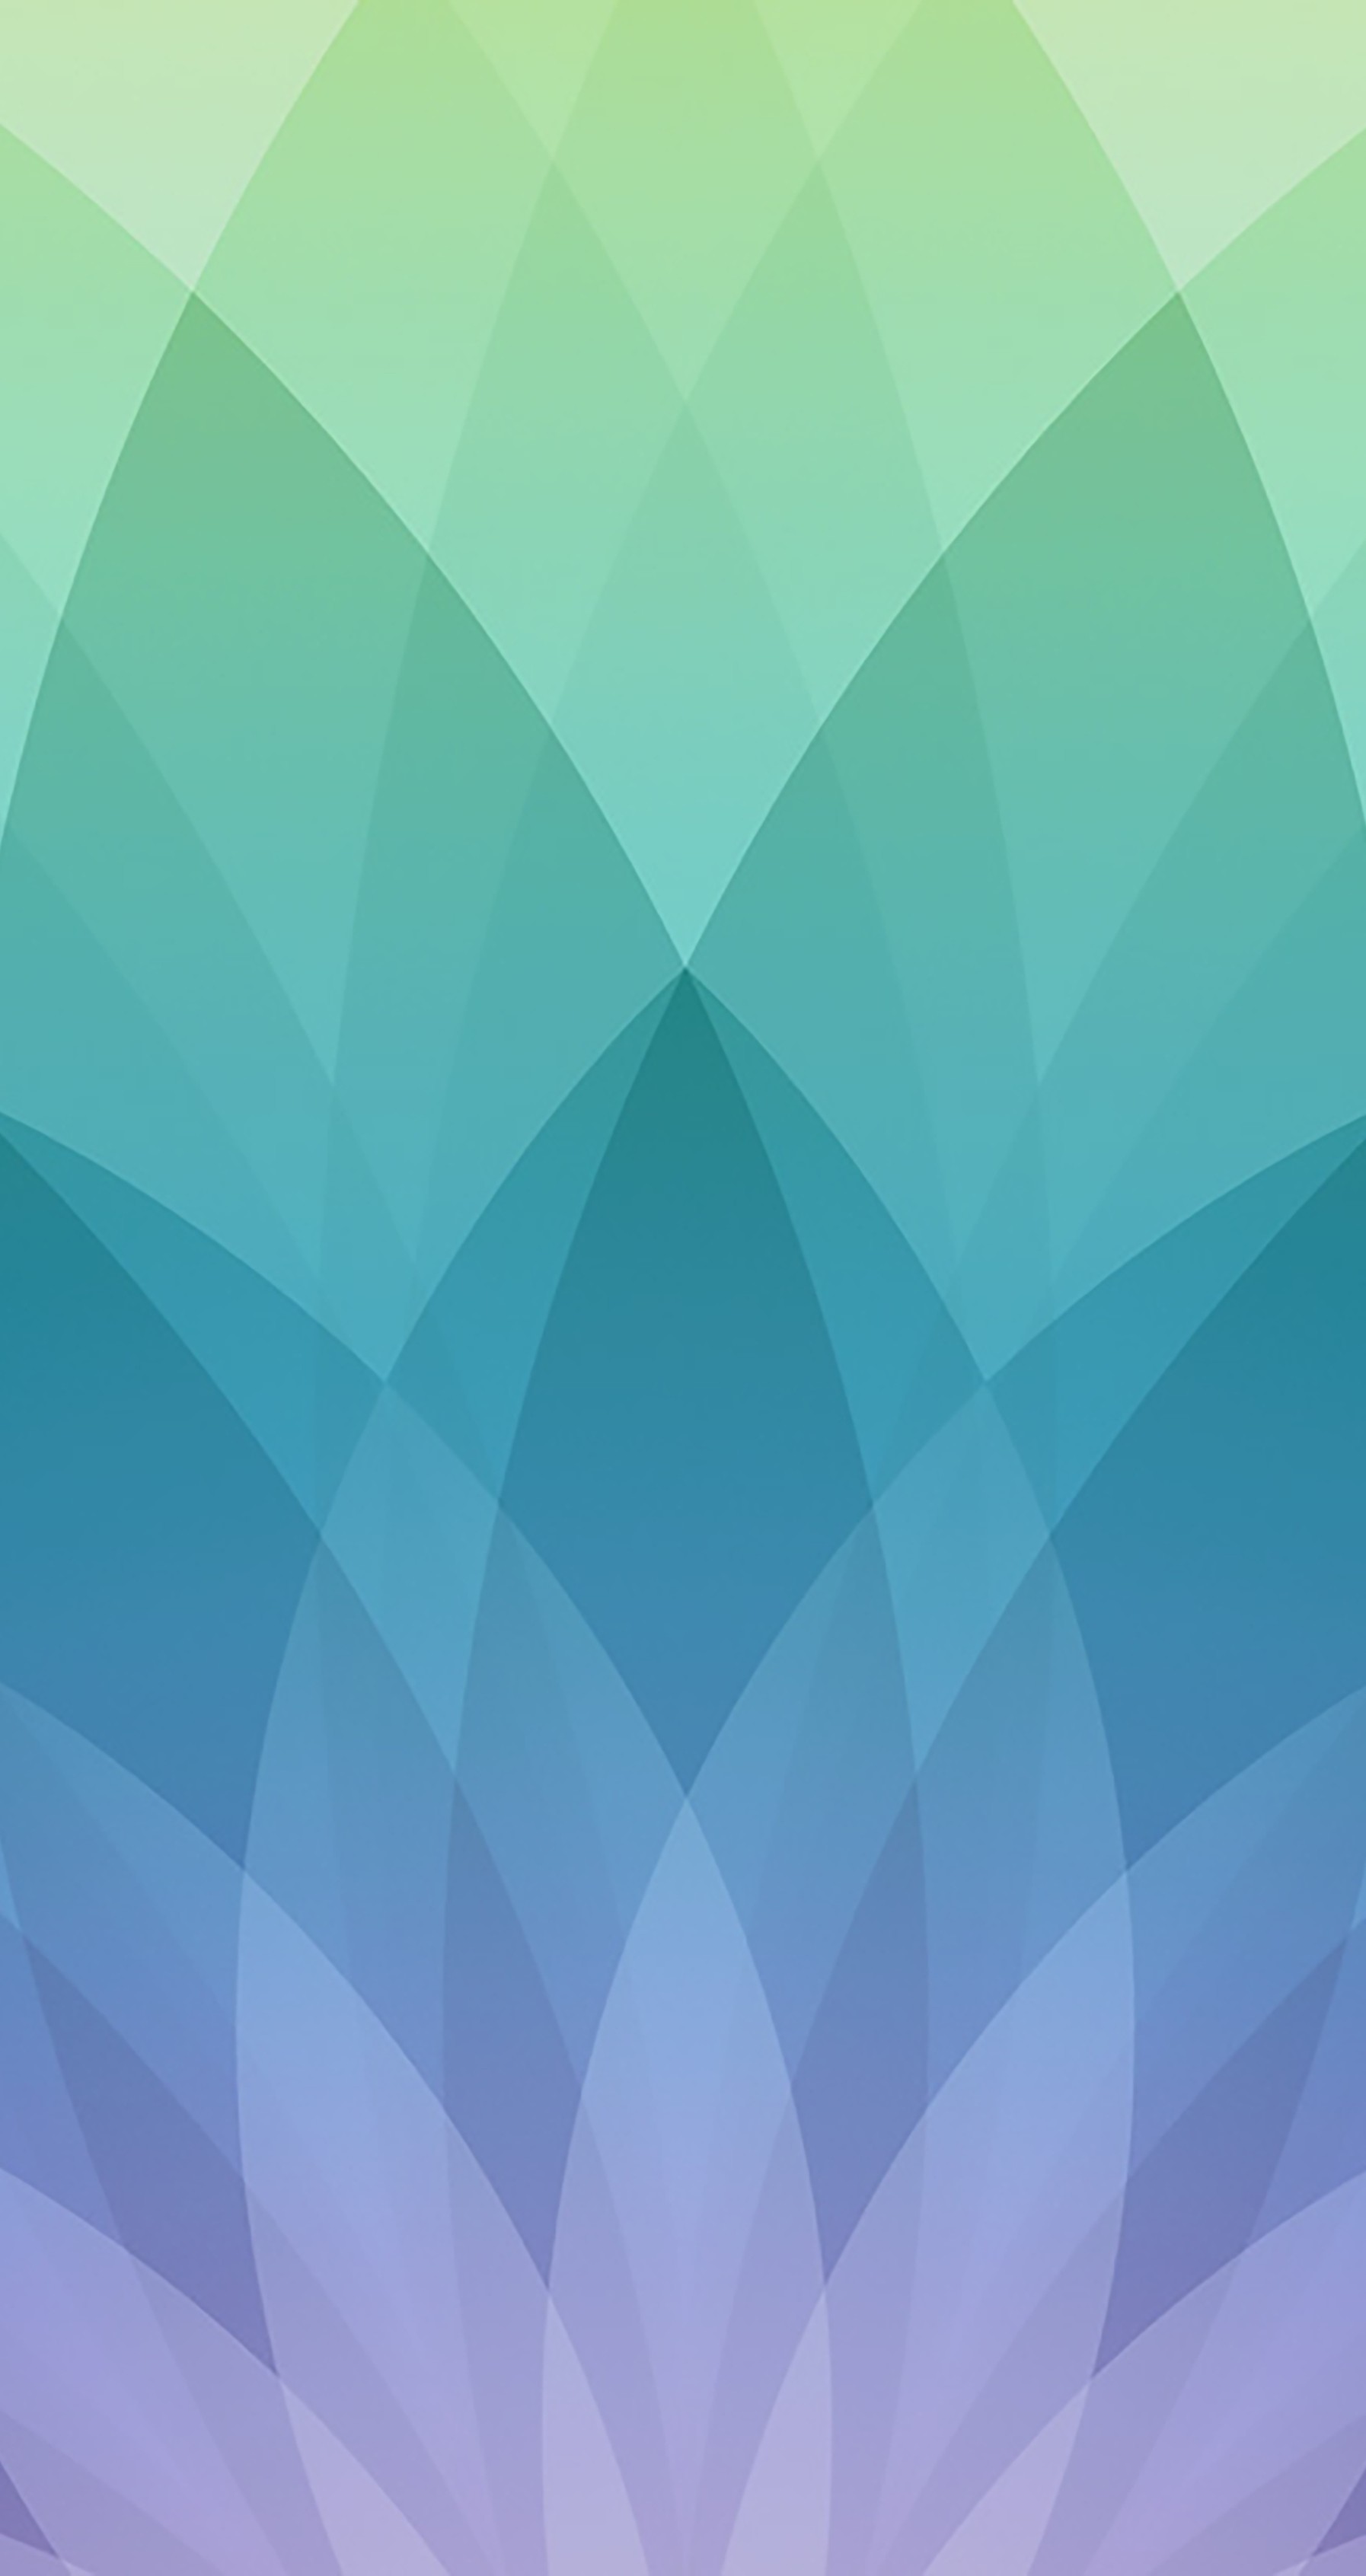 Wallpaper For Iphone - Iphone 7 Wallpaper Turquoise - HD Wallpaper 